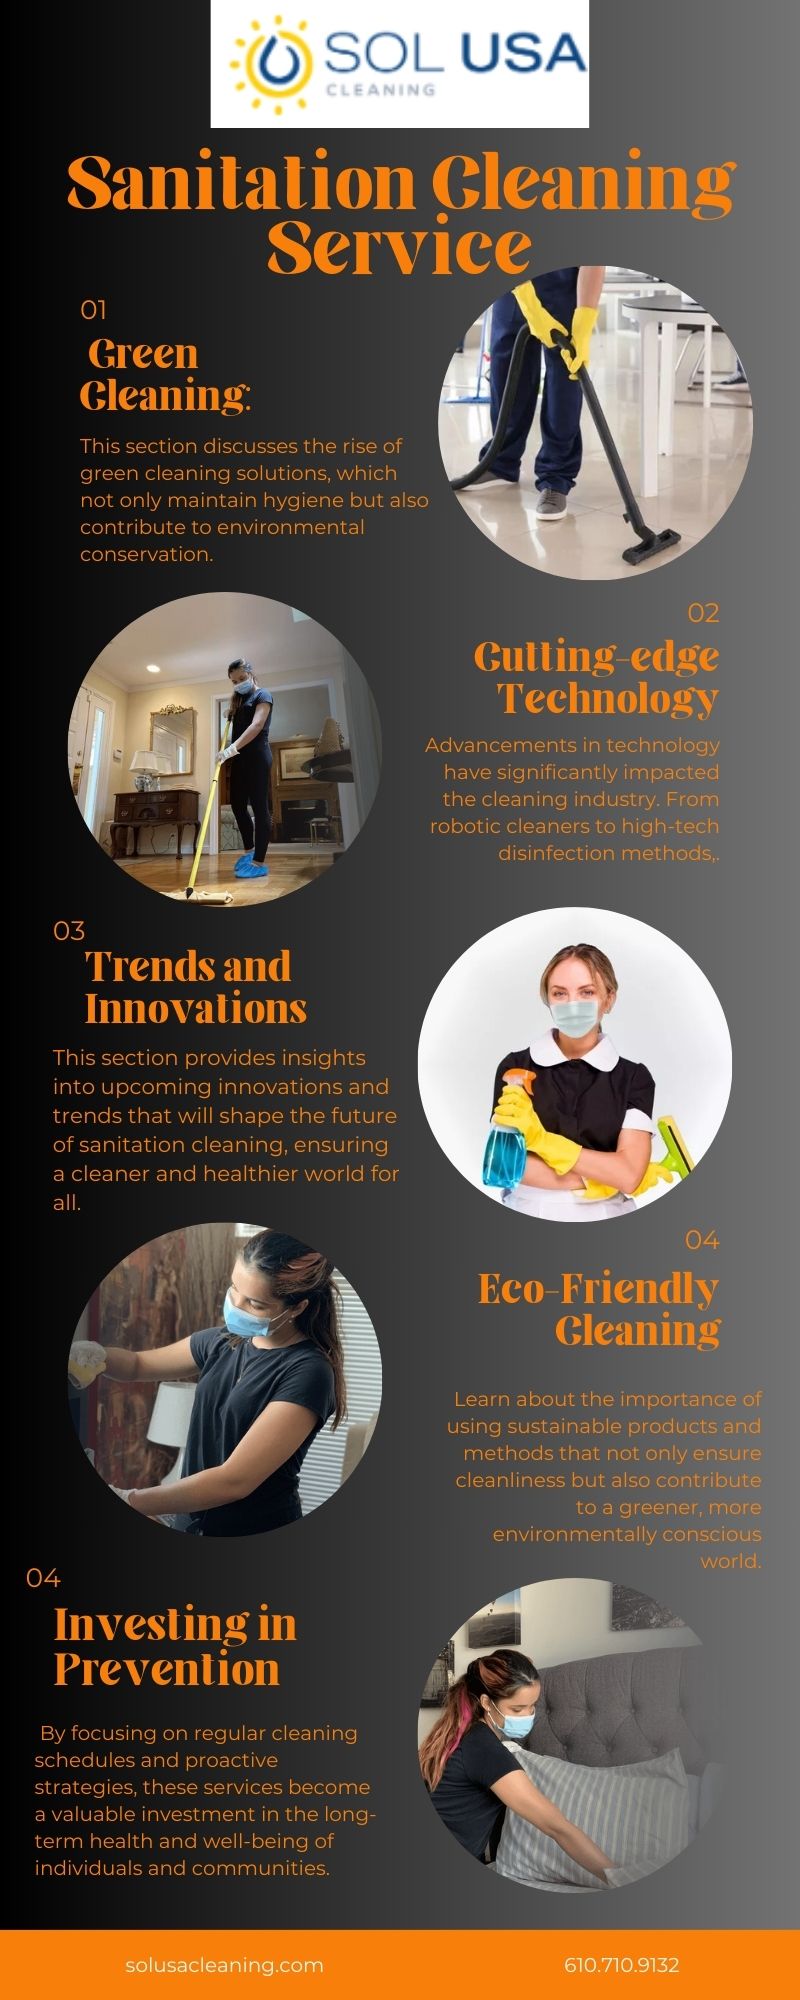 A Sparkling Home with Expert Sanitation Cleaning